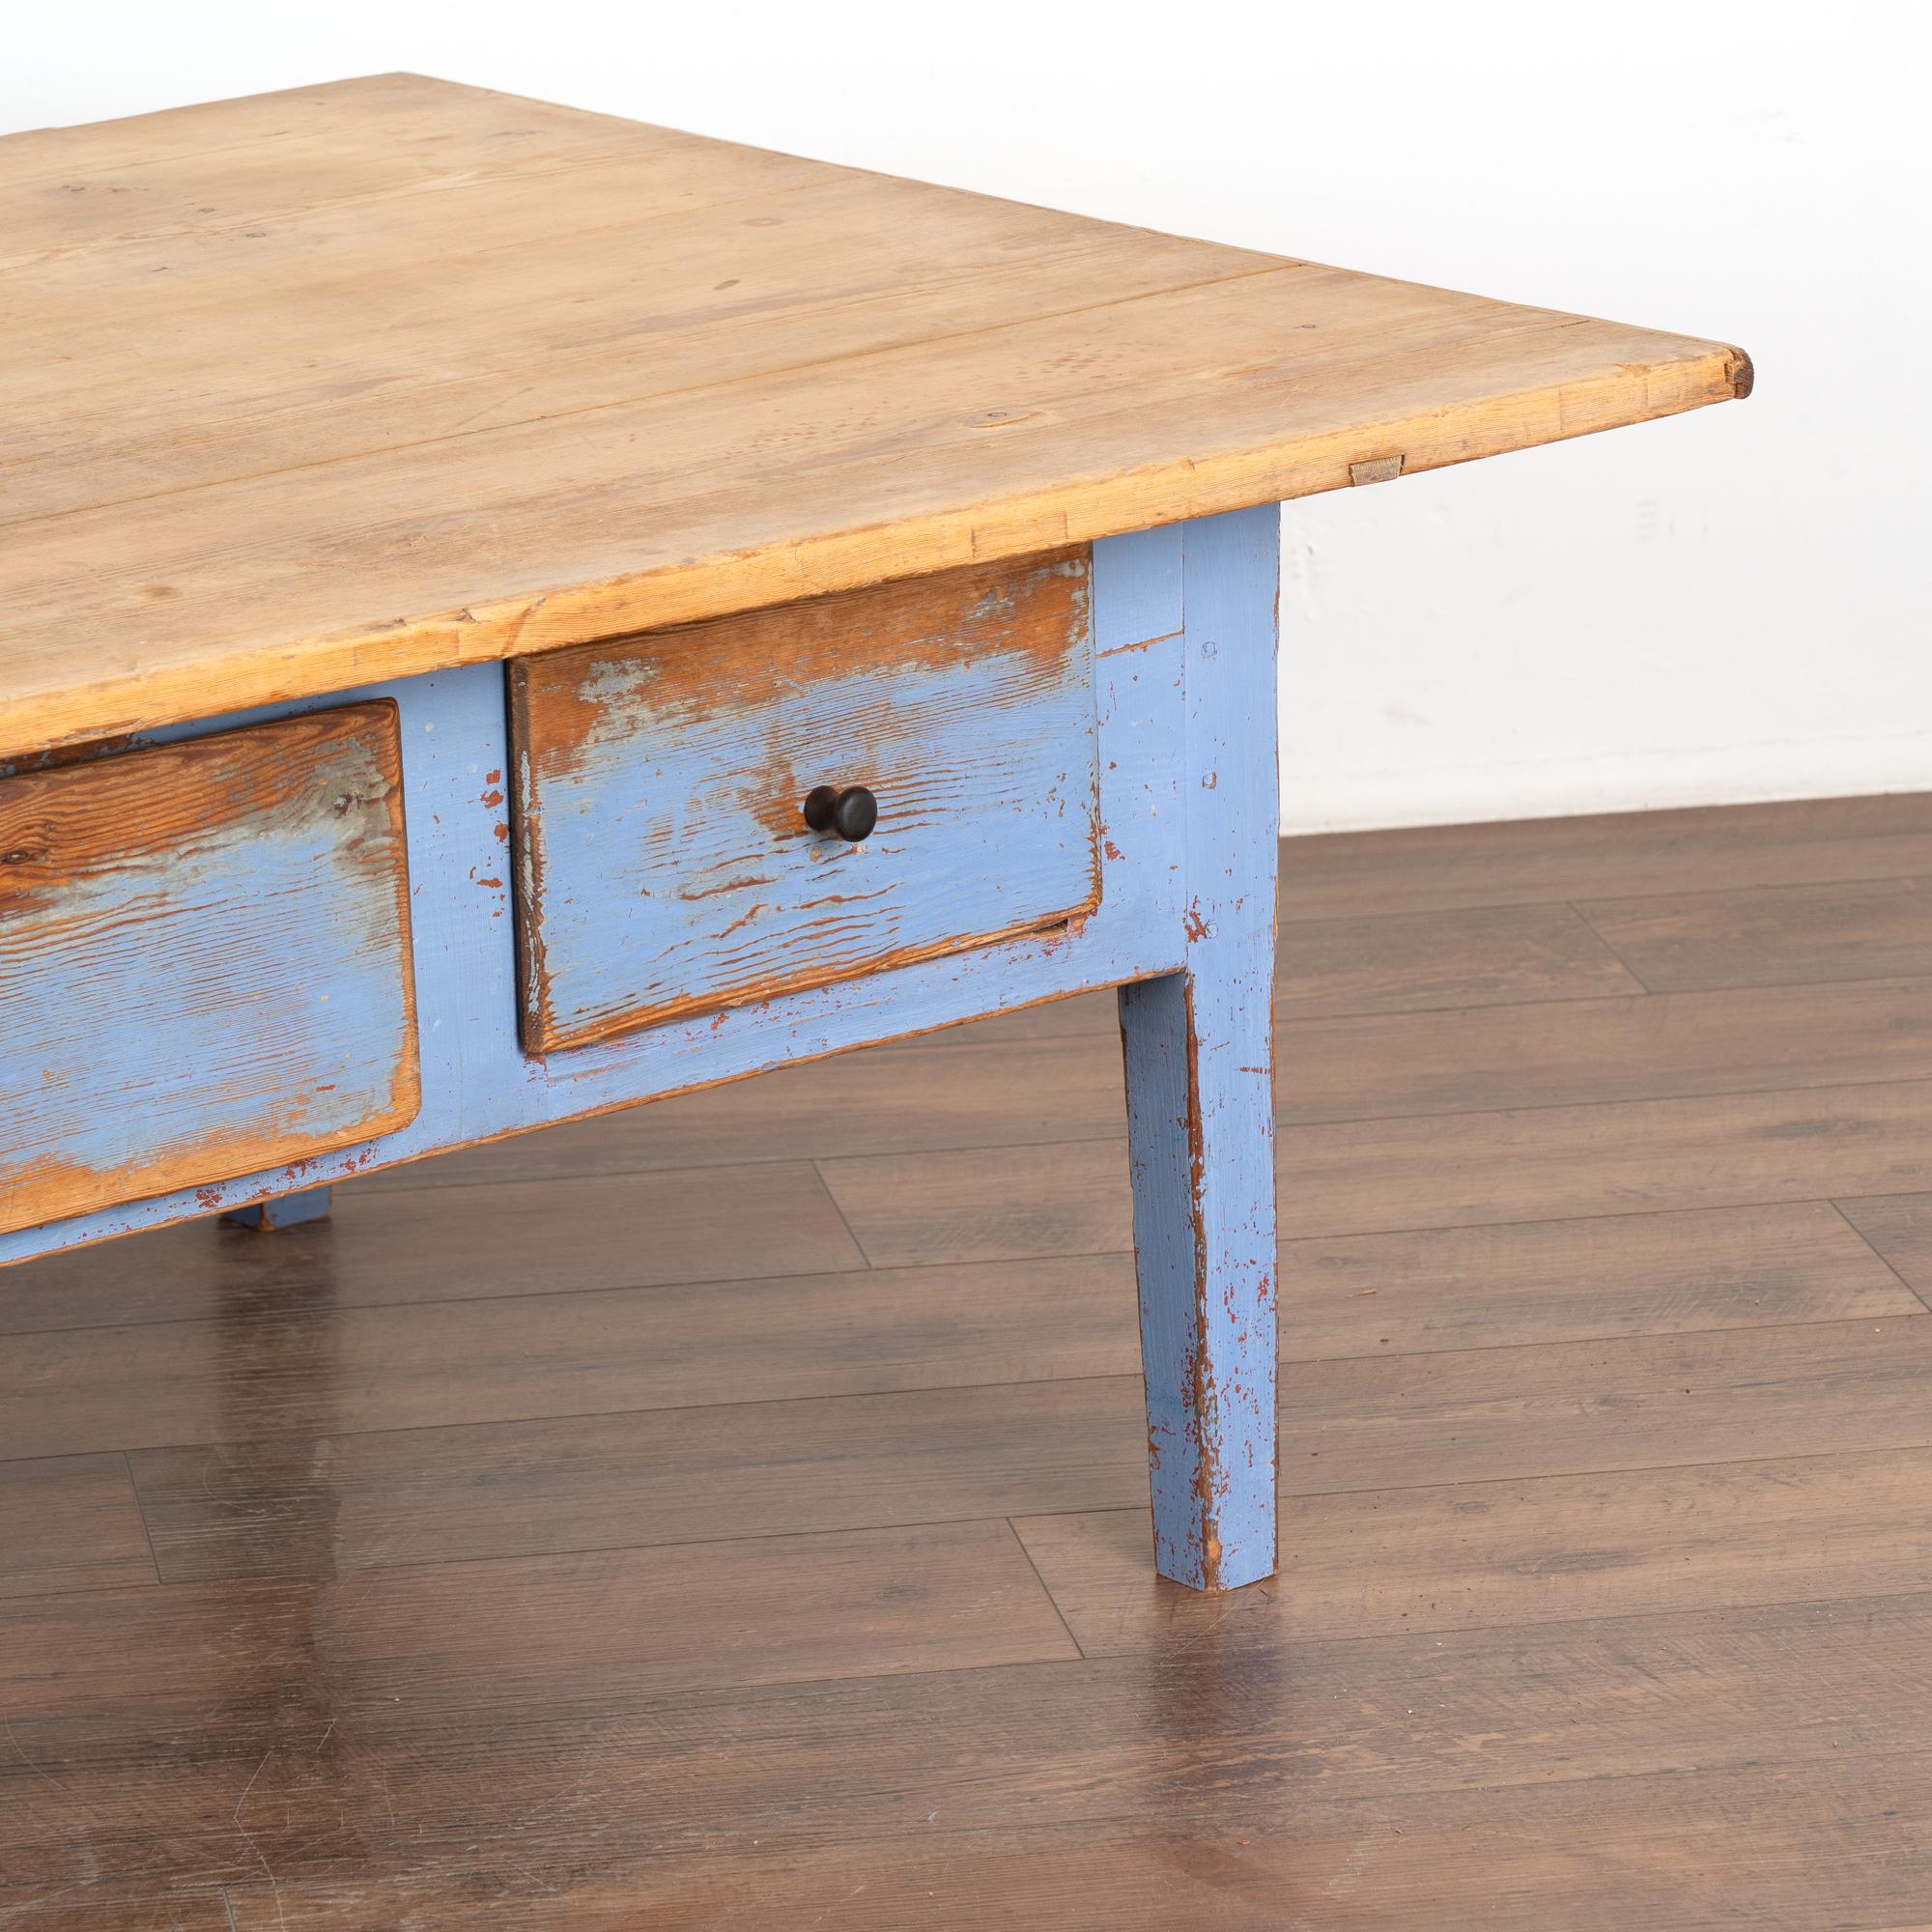 19th Century Rustic Blue Painted Pine Coffee Table With Two Drawers, Sweden circa 1860-80